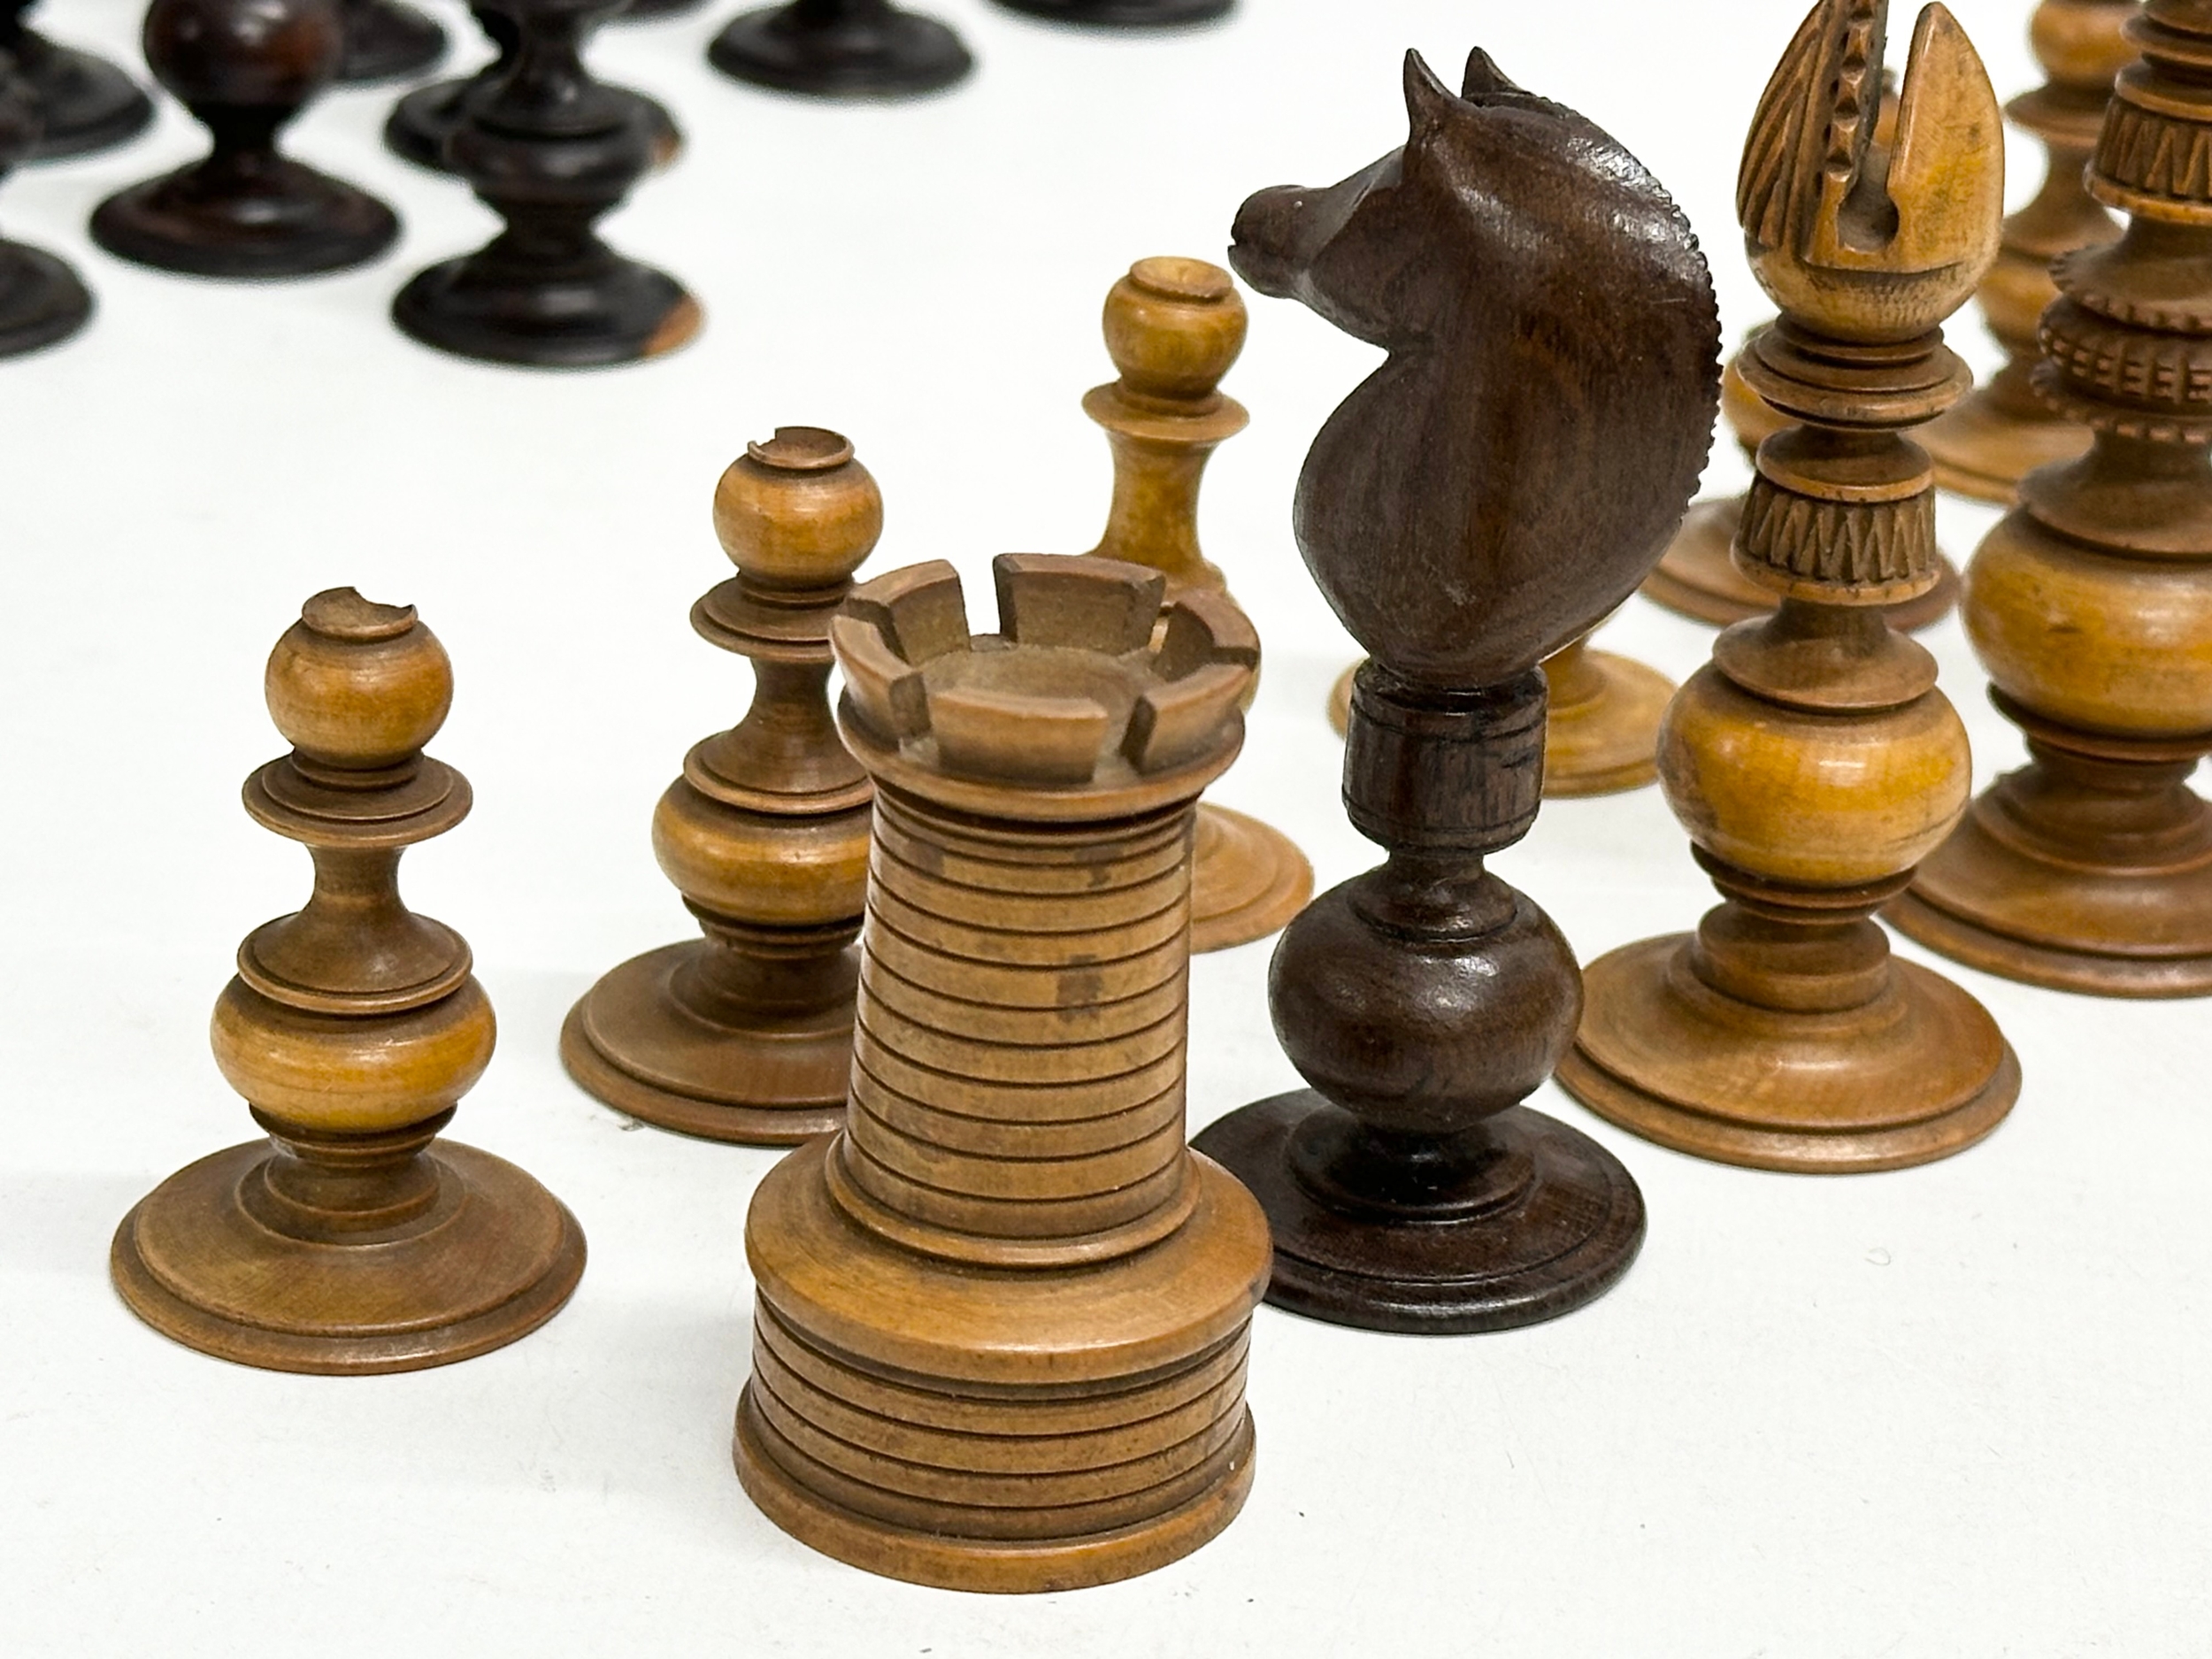 Good quality 19th Century chess pieces in the style of the Holy Land Crusade, Islamic vs Christian - Image 8 of 17